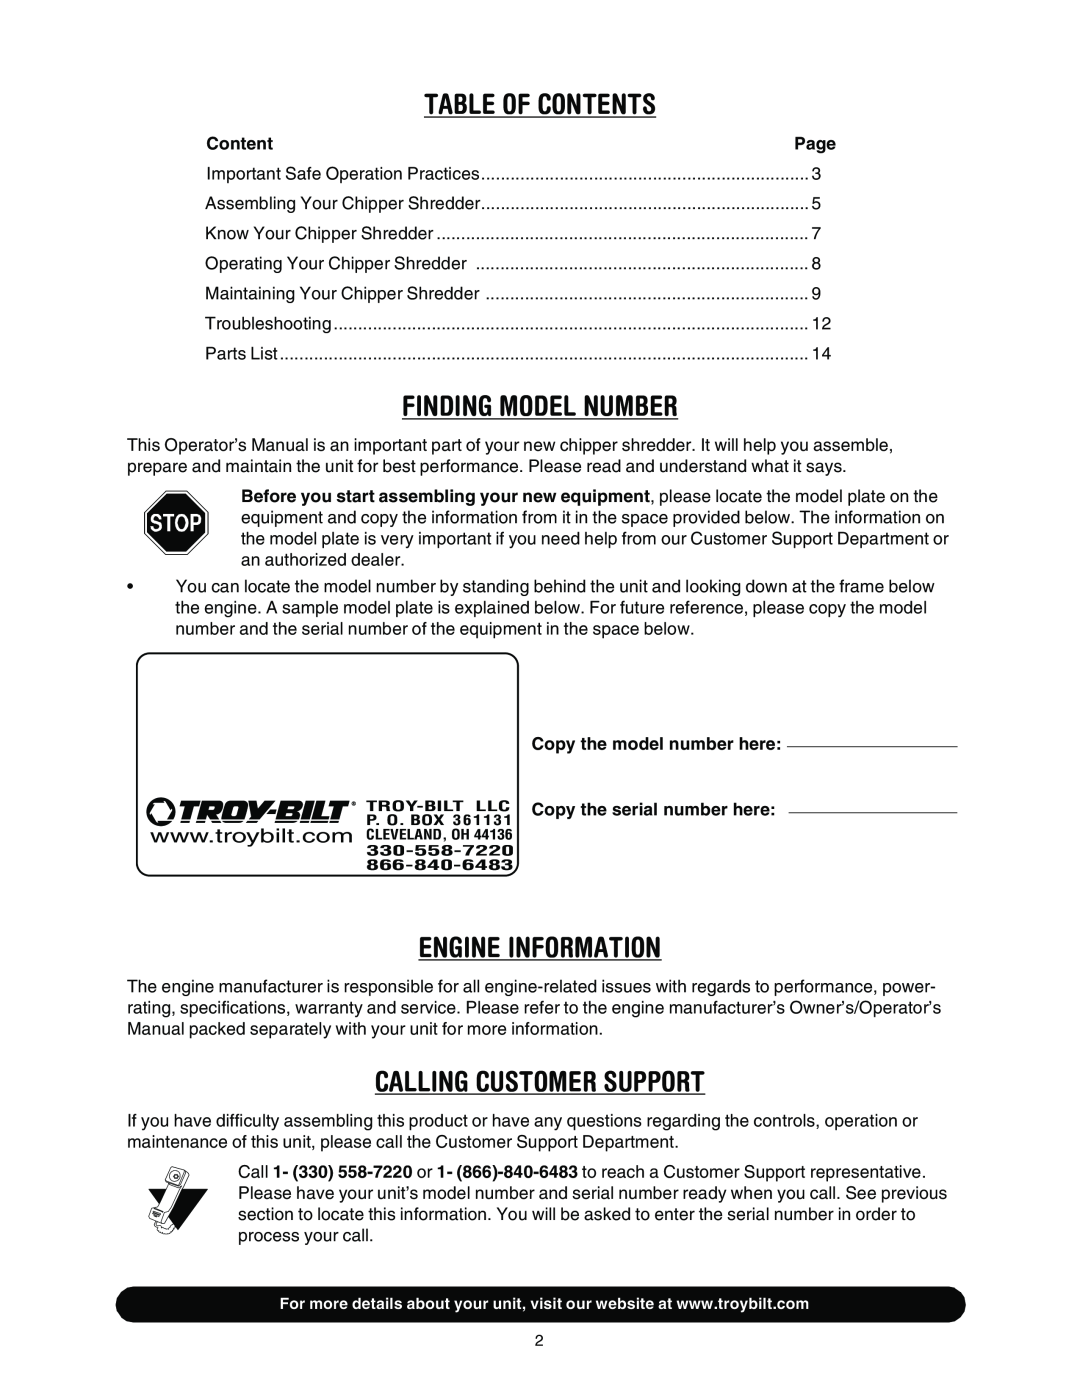 Troy-Bilt 494 manual Table Of Contents, Finding Model Number, Engine Information, Calling Customer Support 